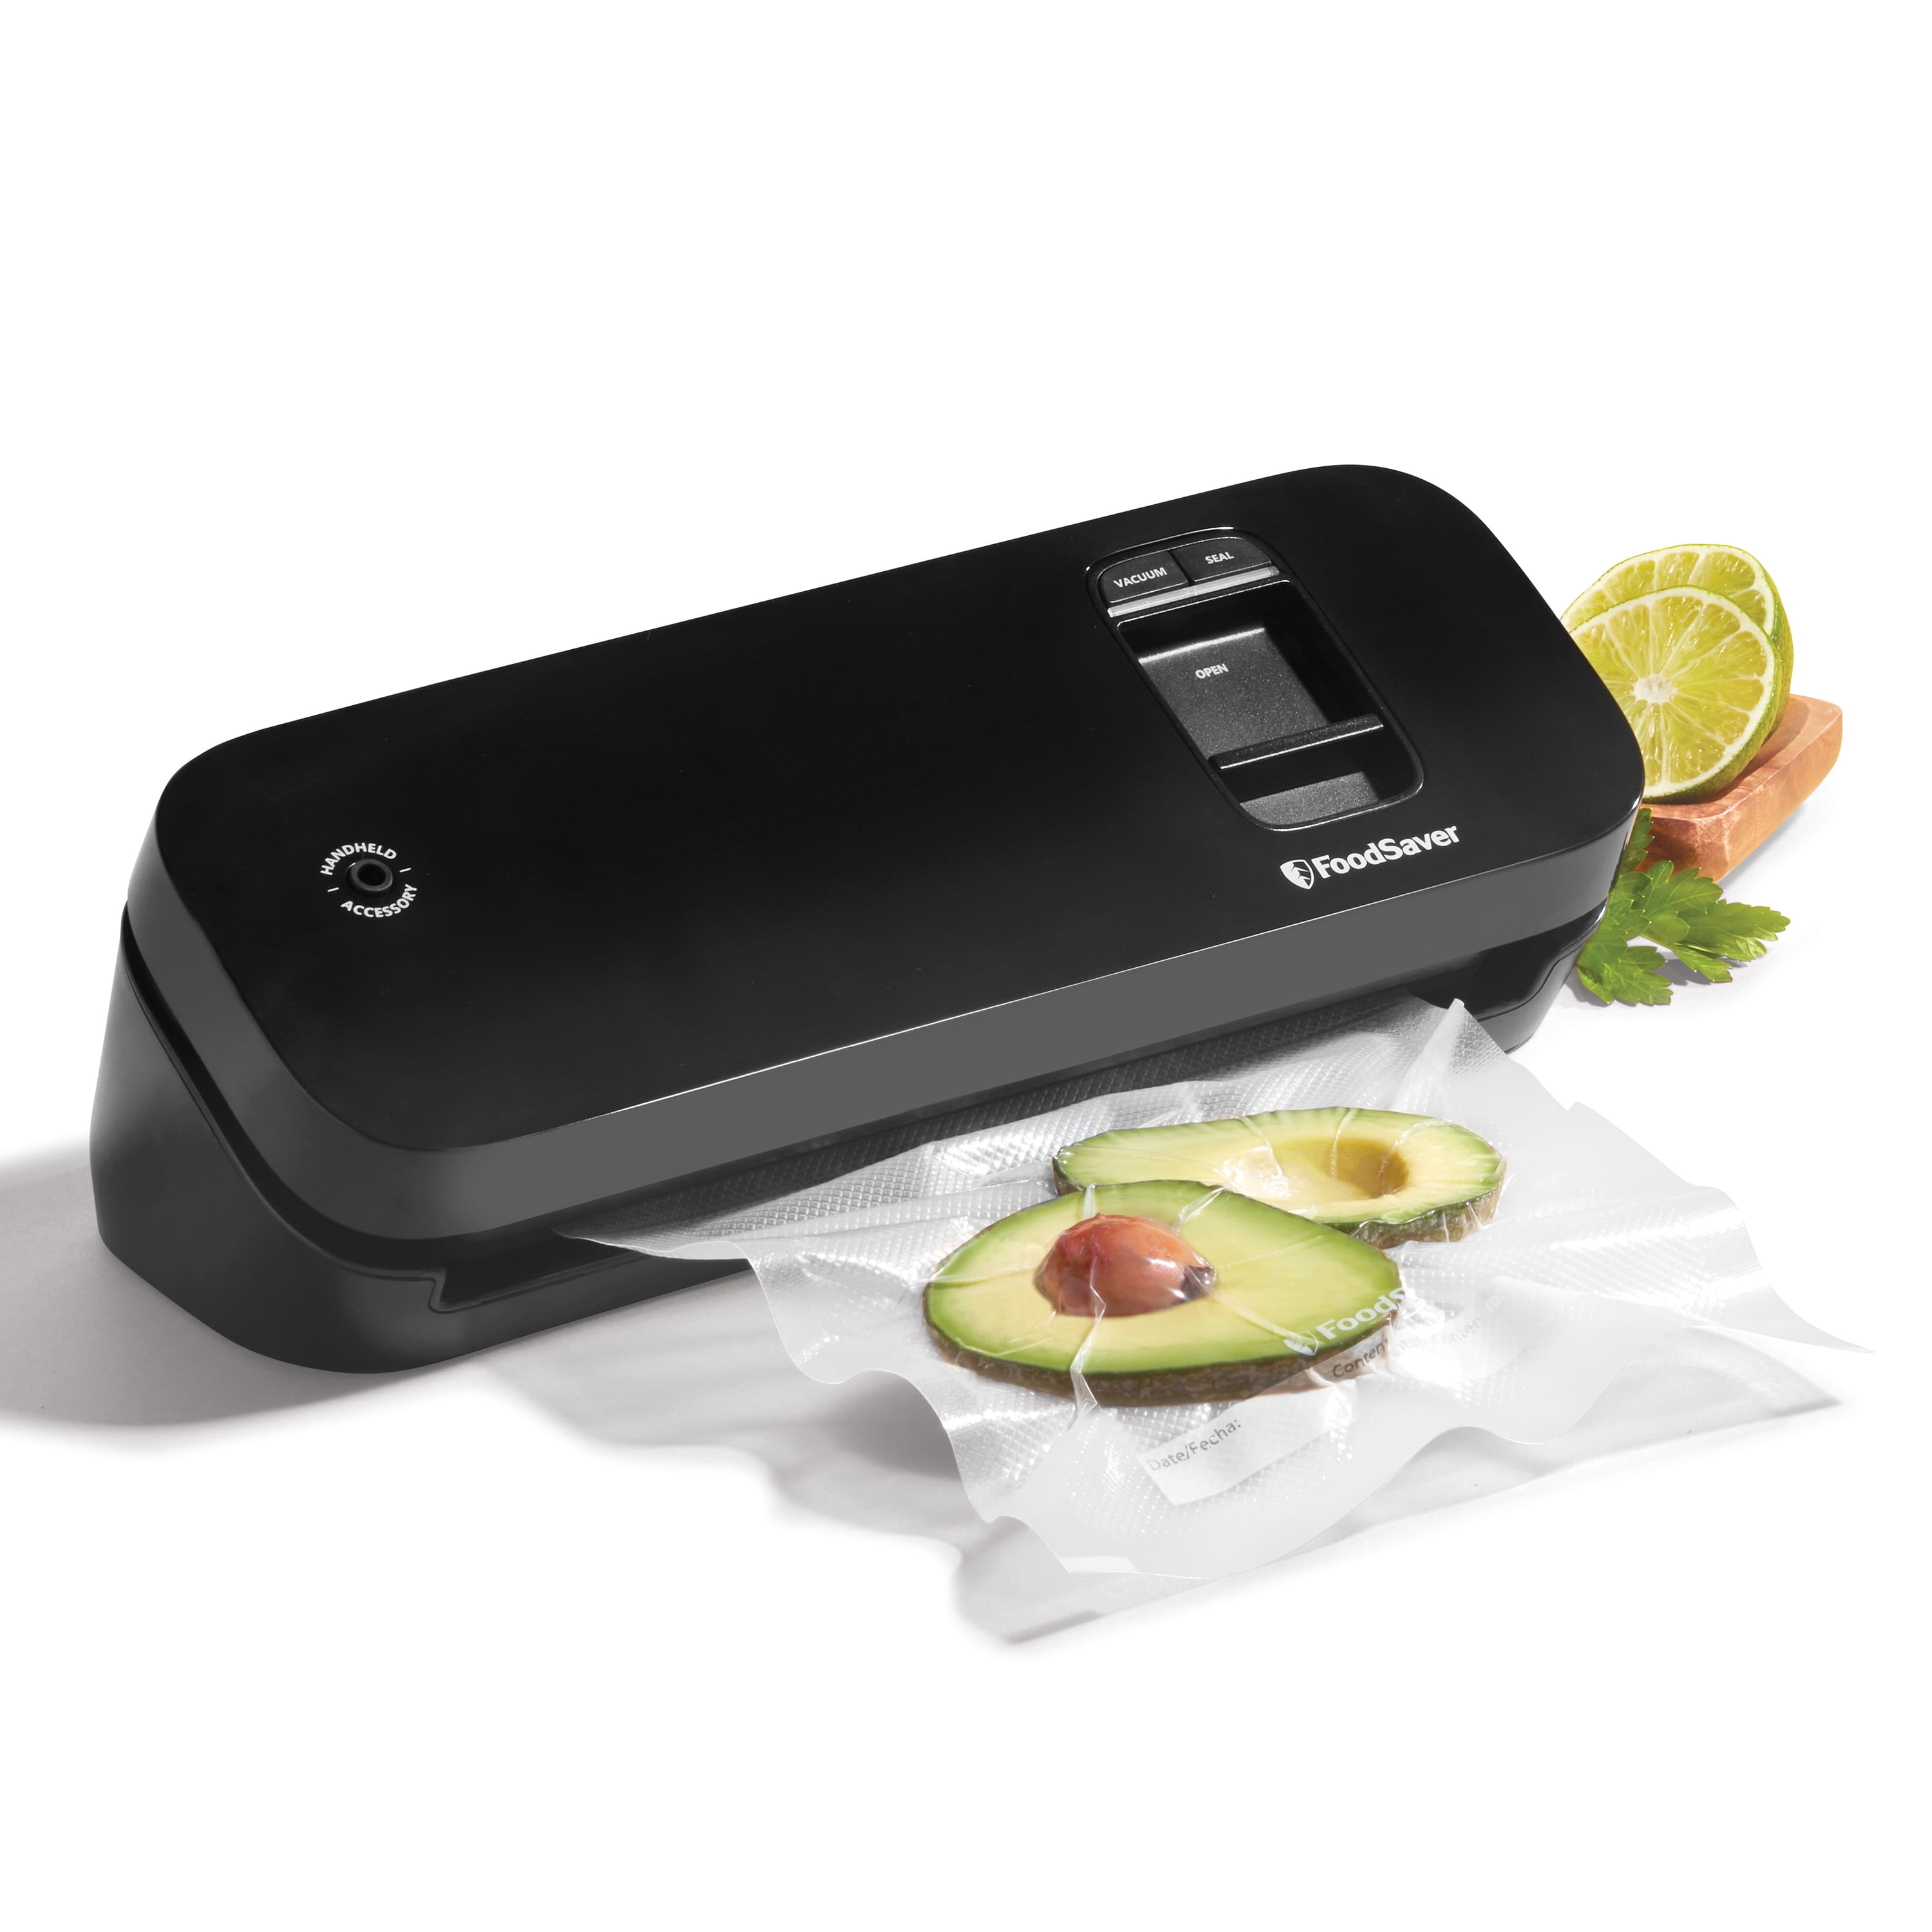 Picture of Newell 31161363 FoodSaver Compact Vacuum Sealer